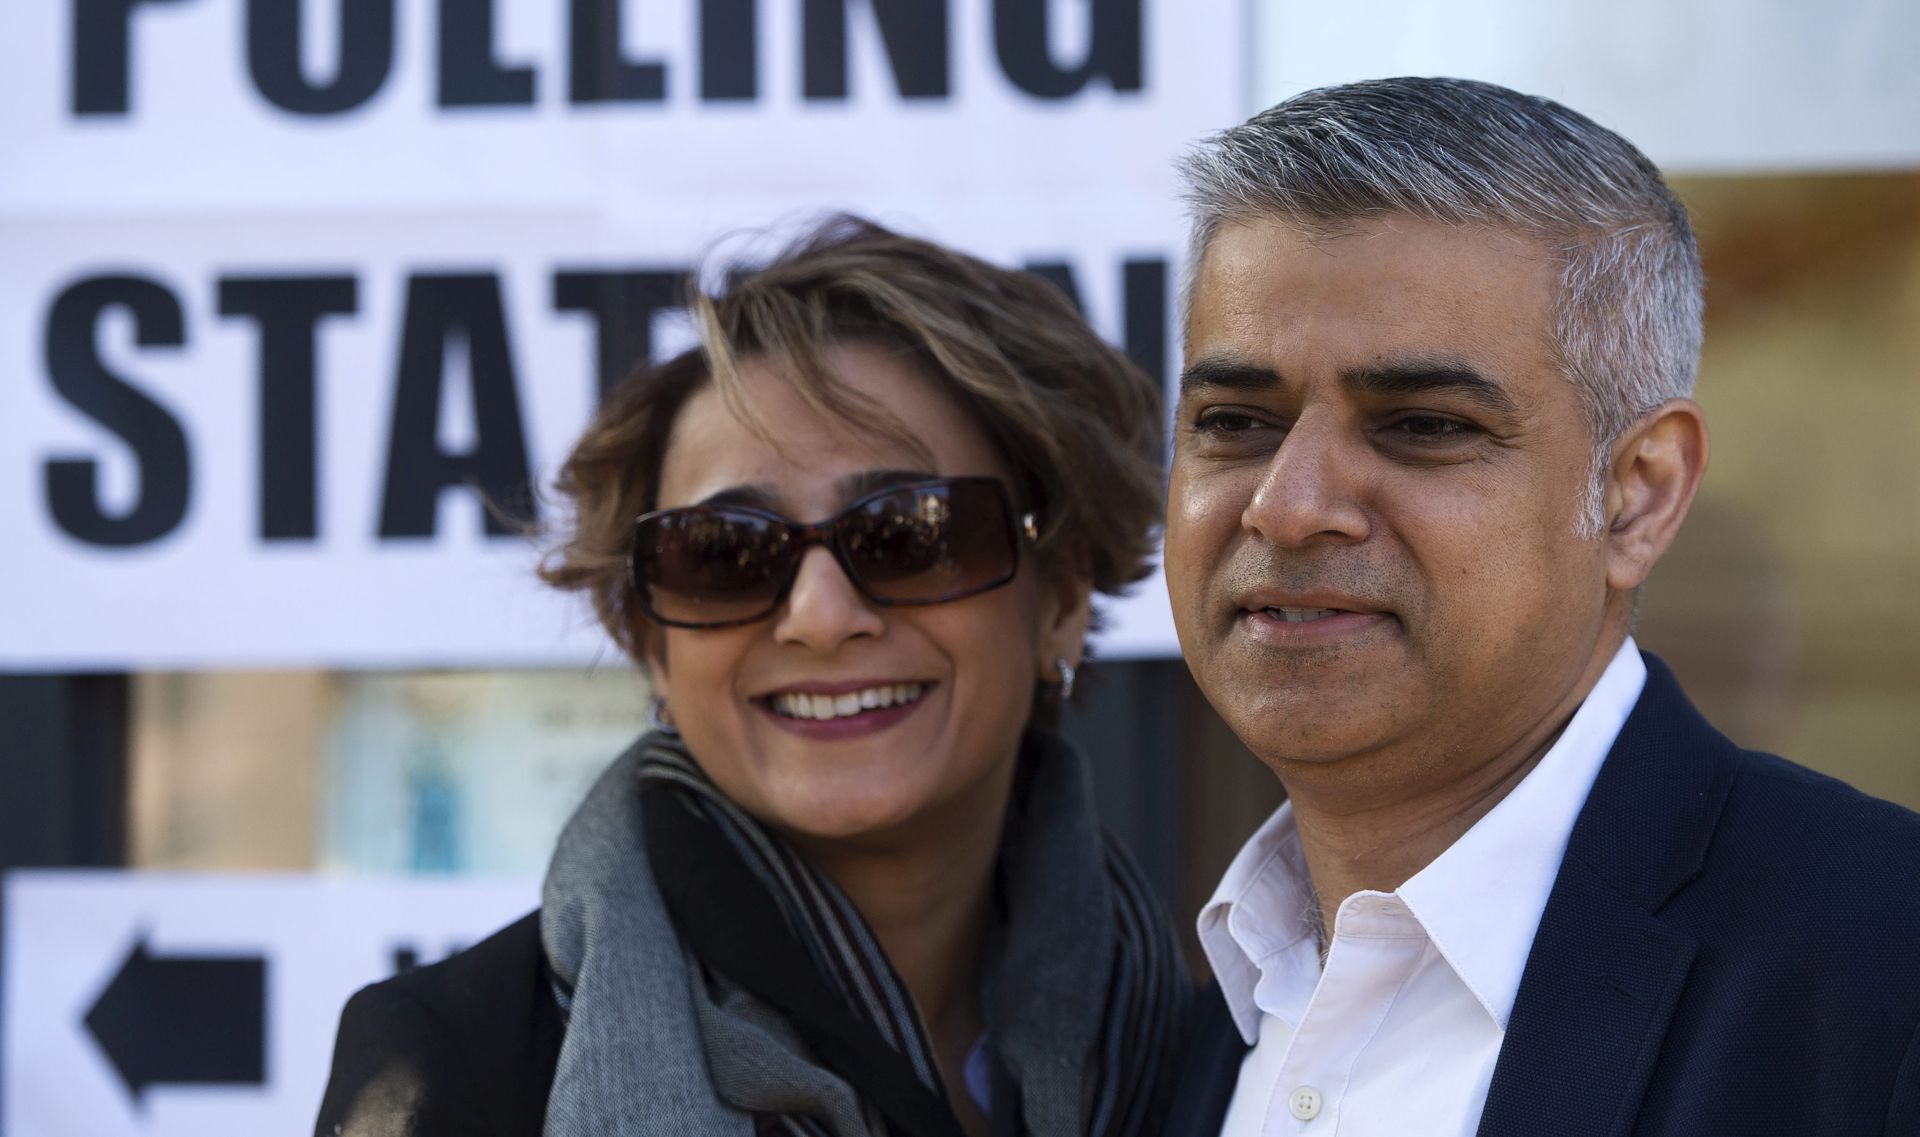 epa05290243 The Labour party candidate for Mayor of London Sadiq Khan (R) poses with his wife Saadiya Khan (L) after voting at a polling station in south London, Britain, 05 May 2016. Britons are voting in local elections across the UK today.  EPA/HANNAH MCKAY